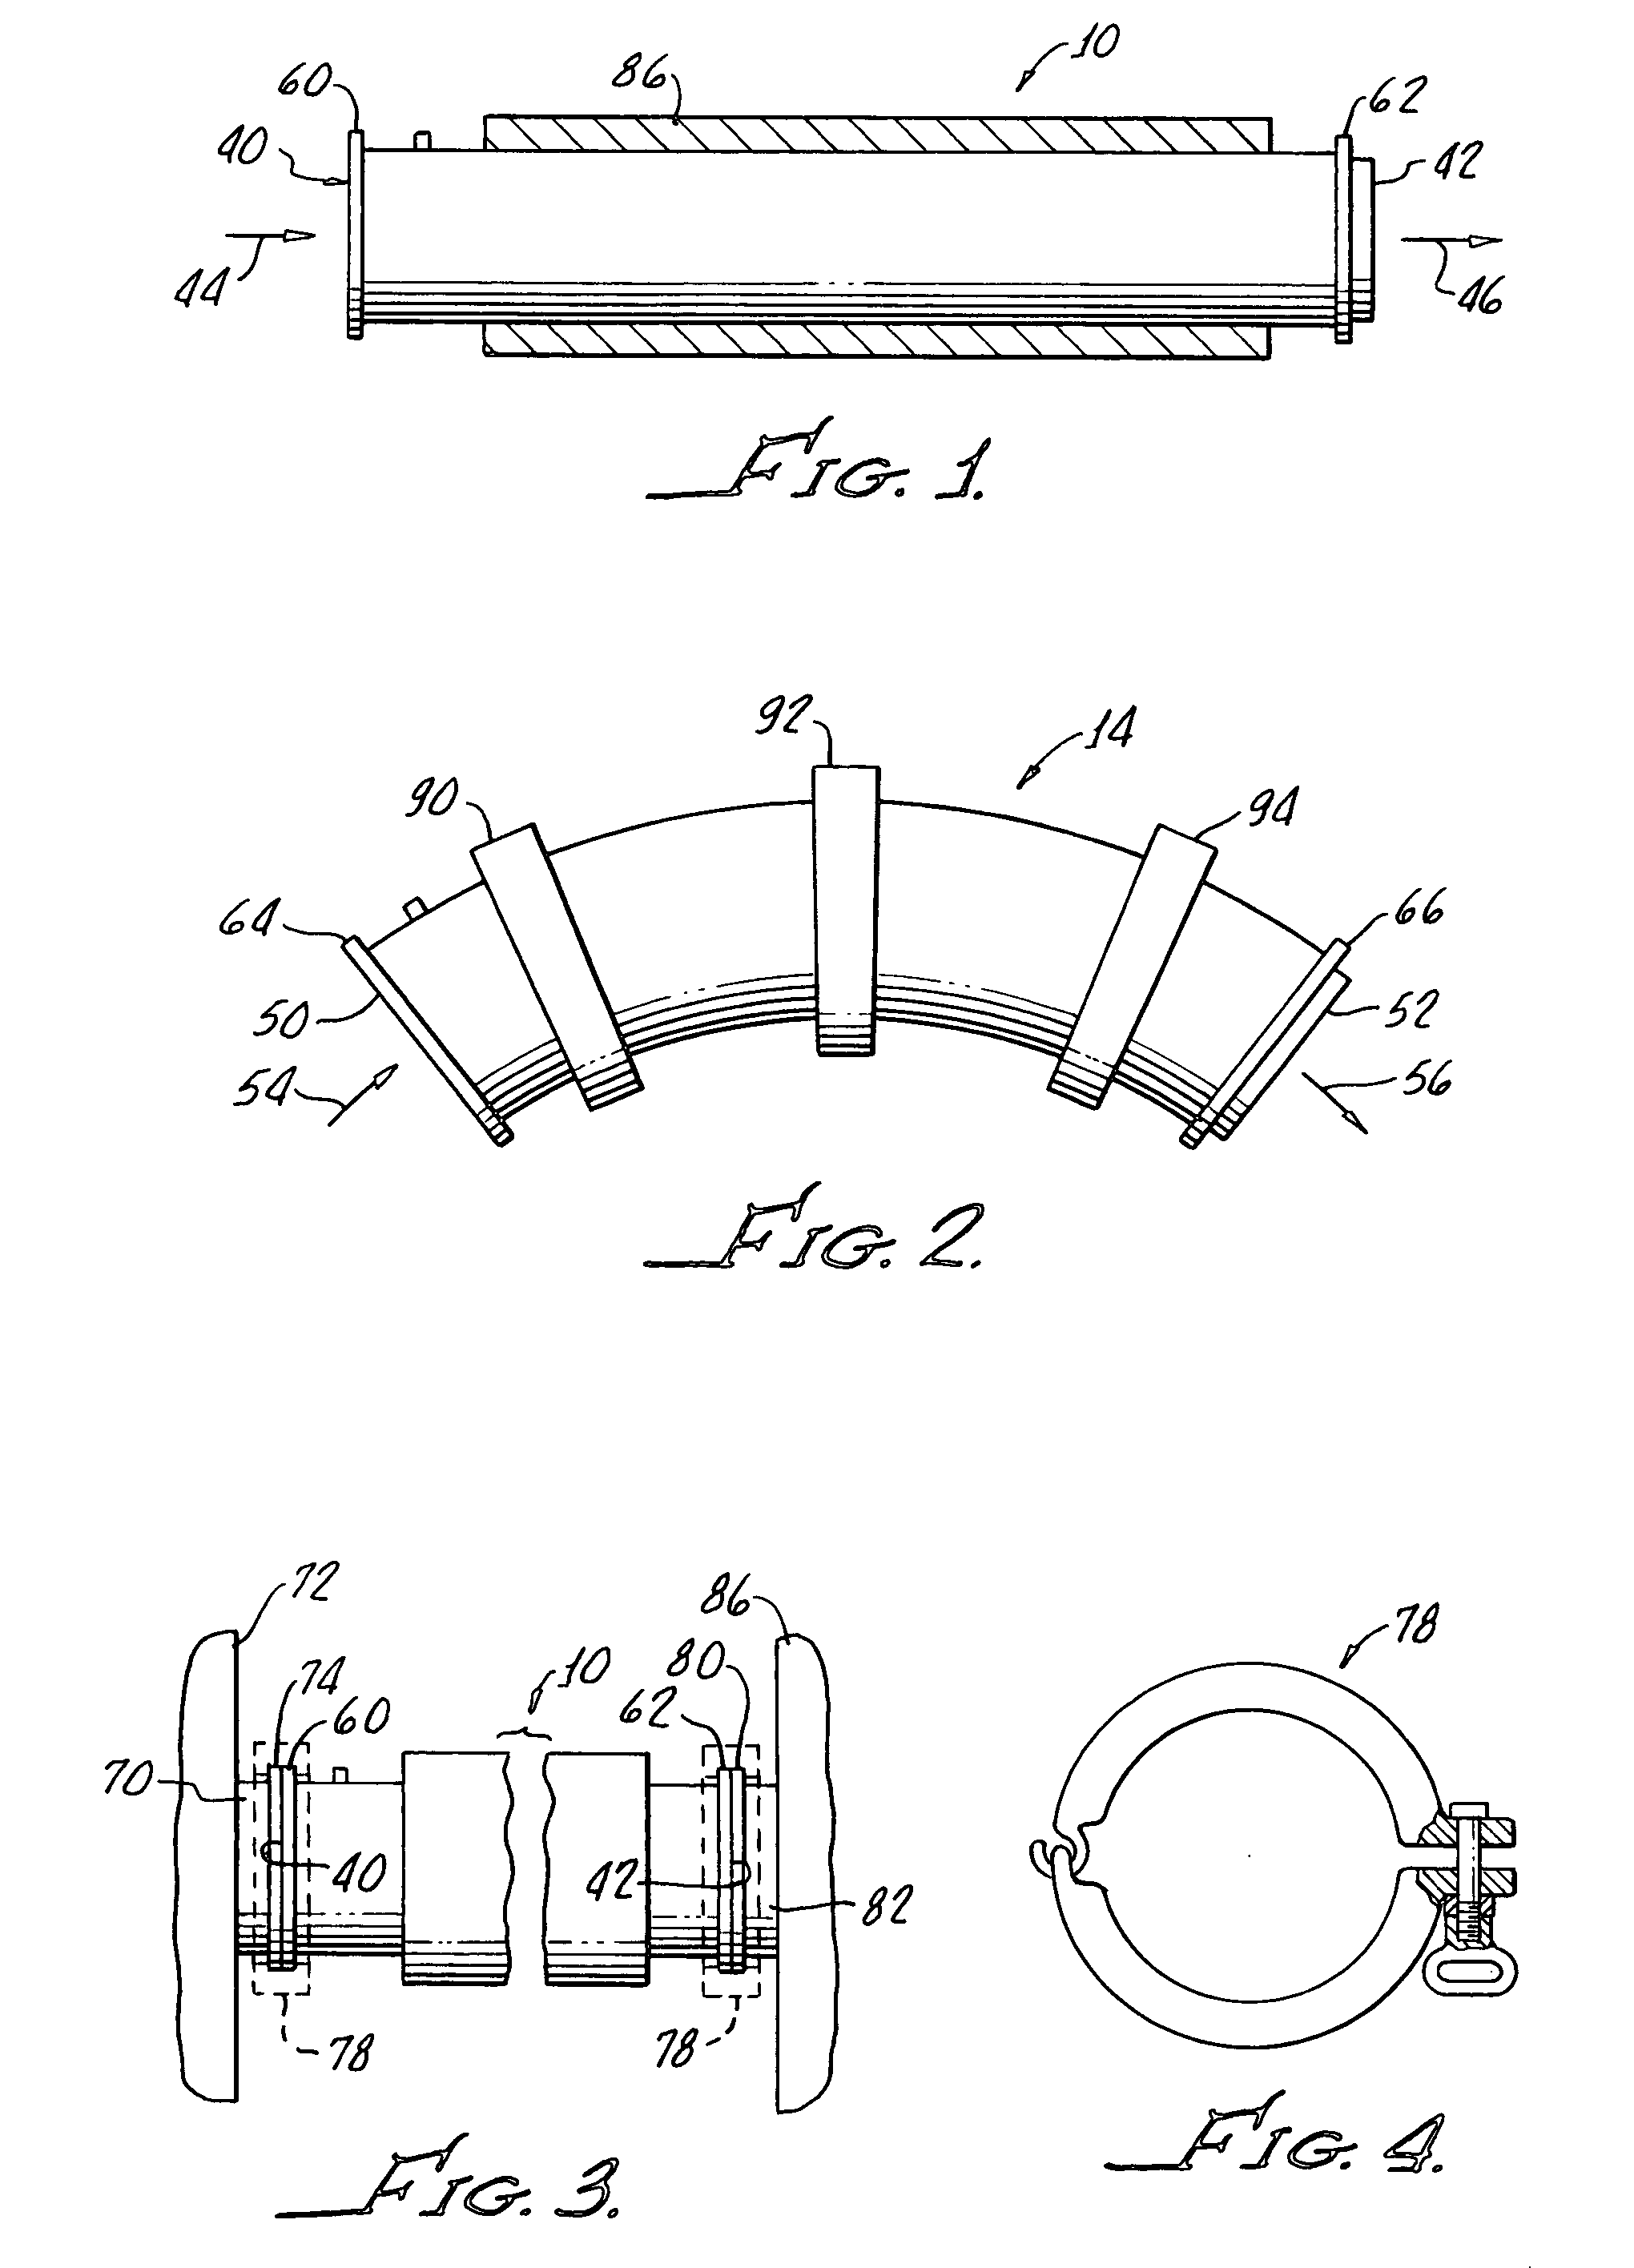 Magnetic industrial device